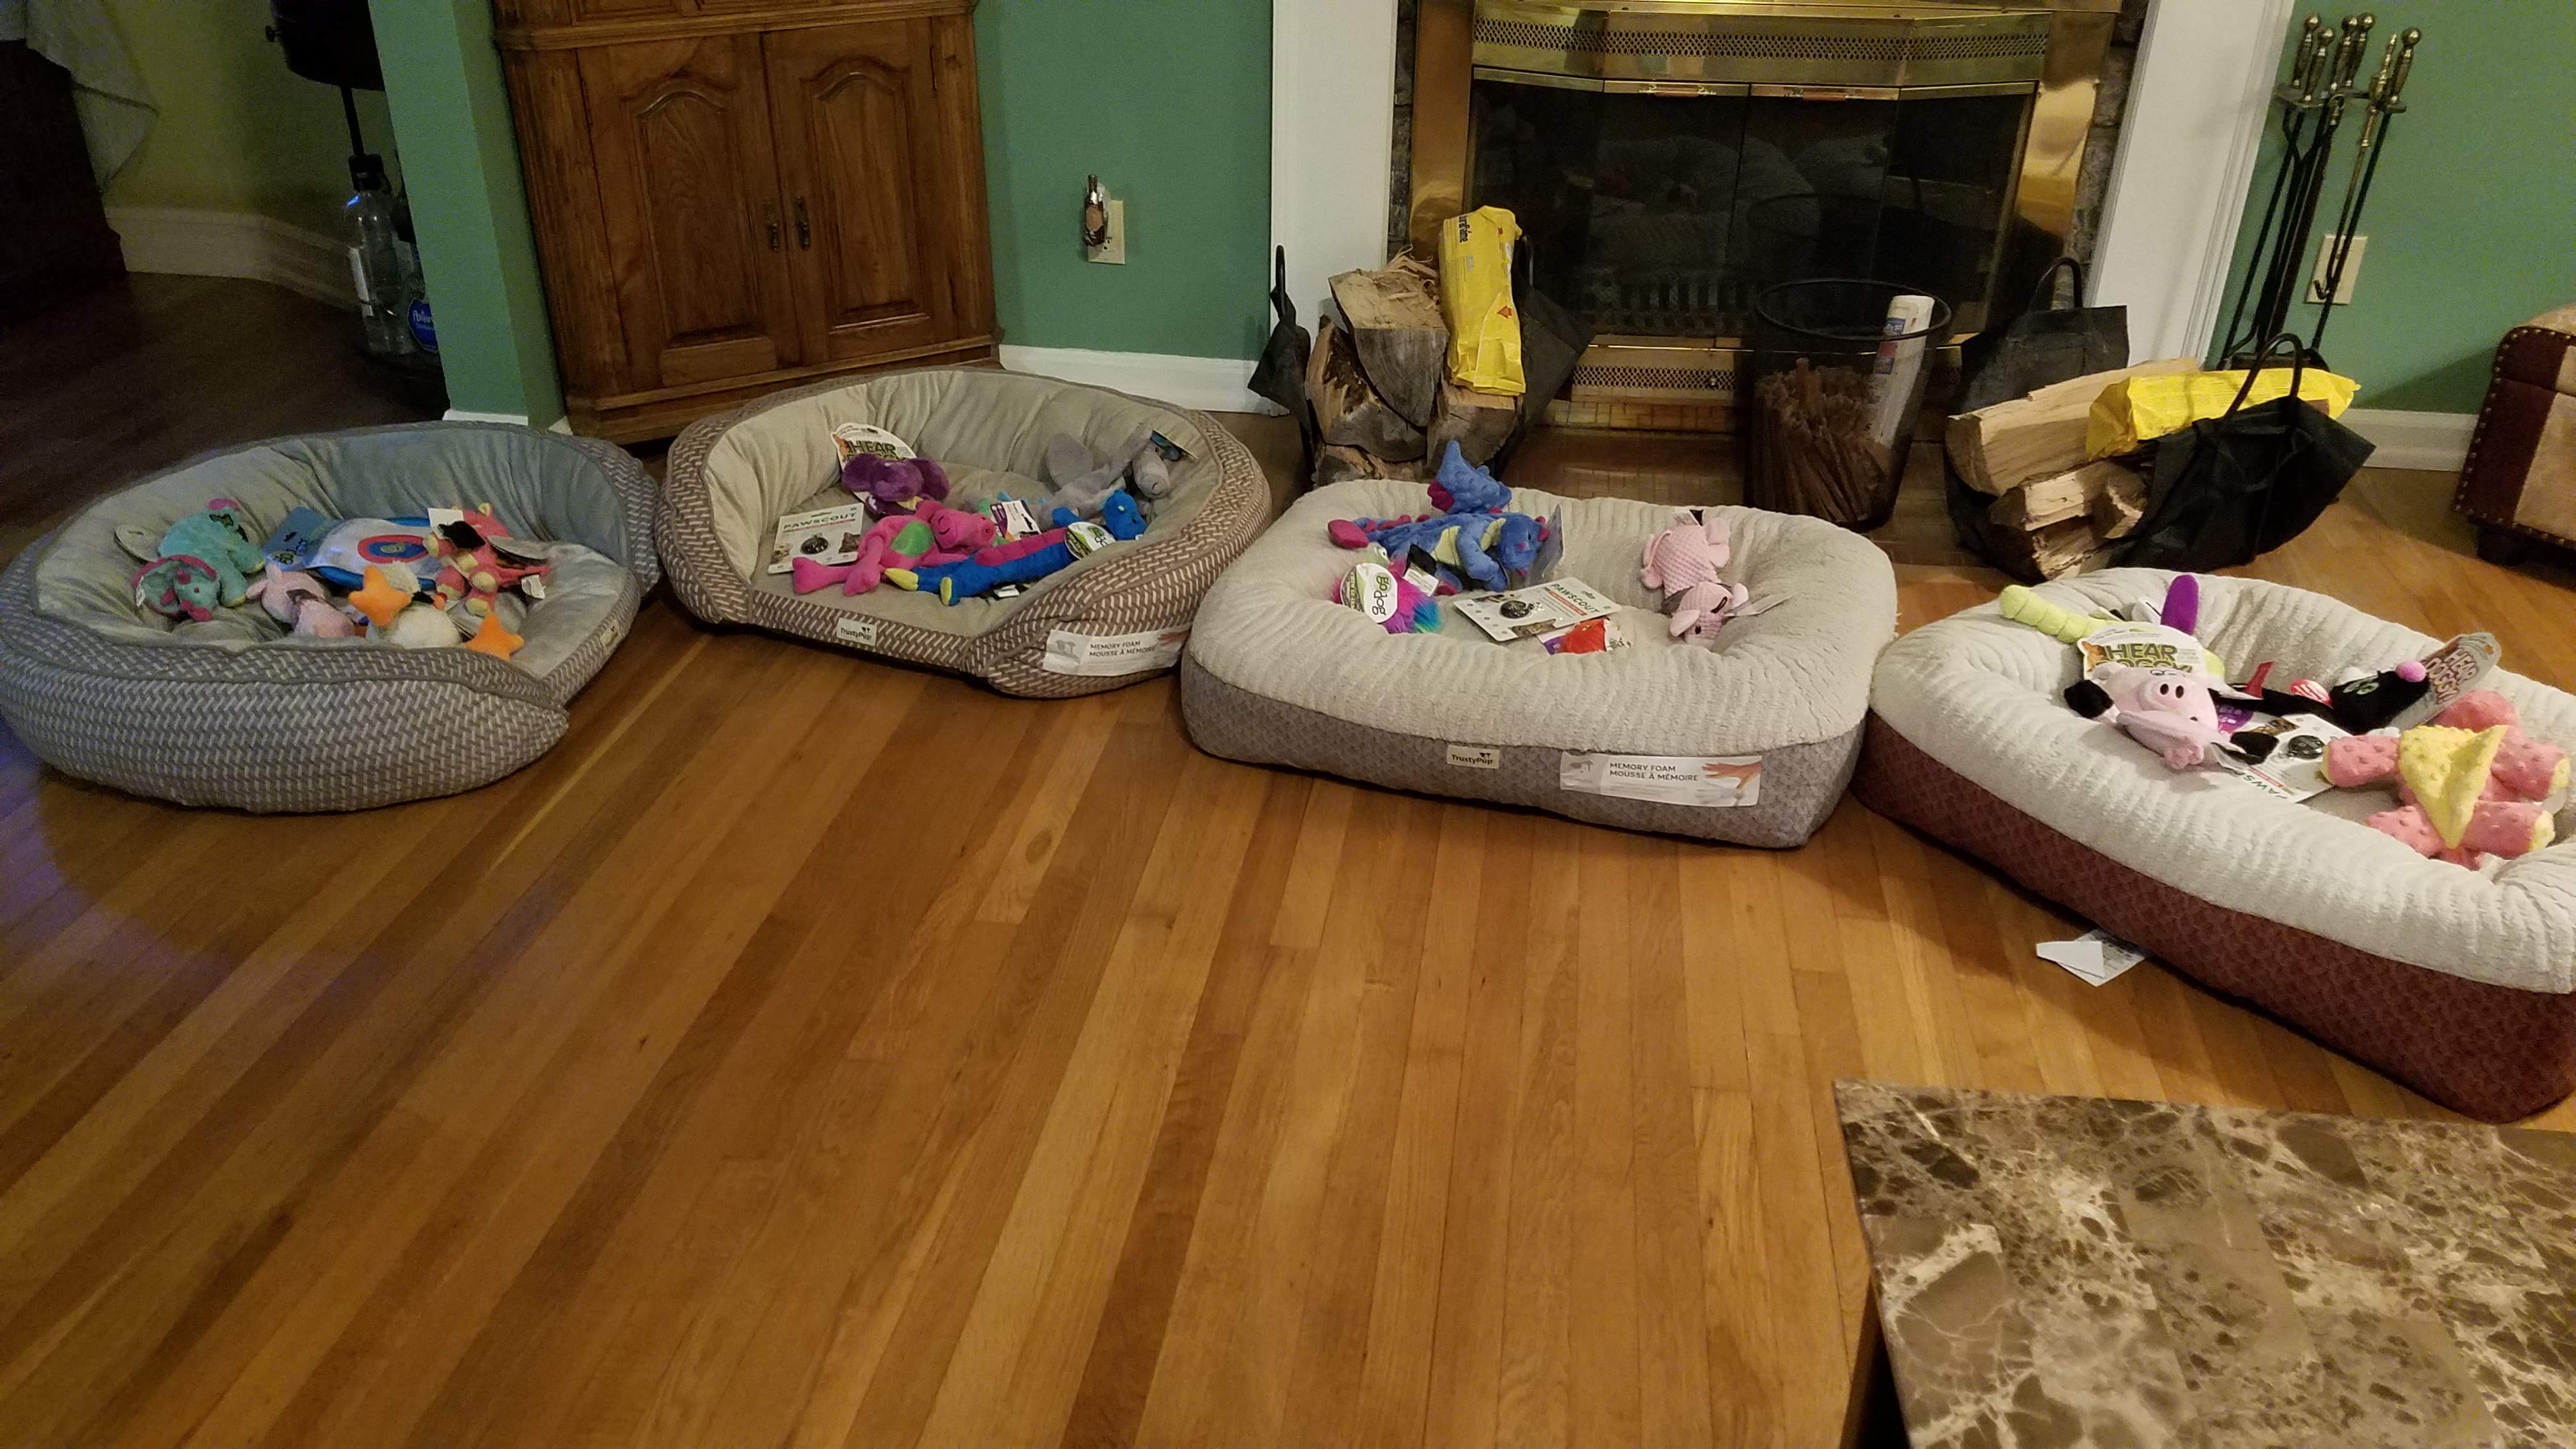 Worldwise Donates Pet Beds Toys to Alexanders Angels Buddy Walk 2018